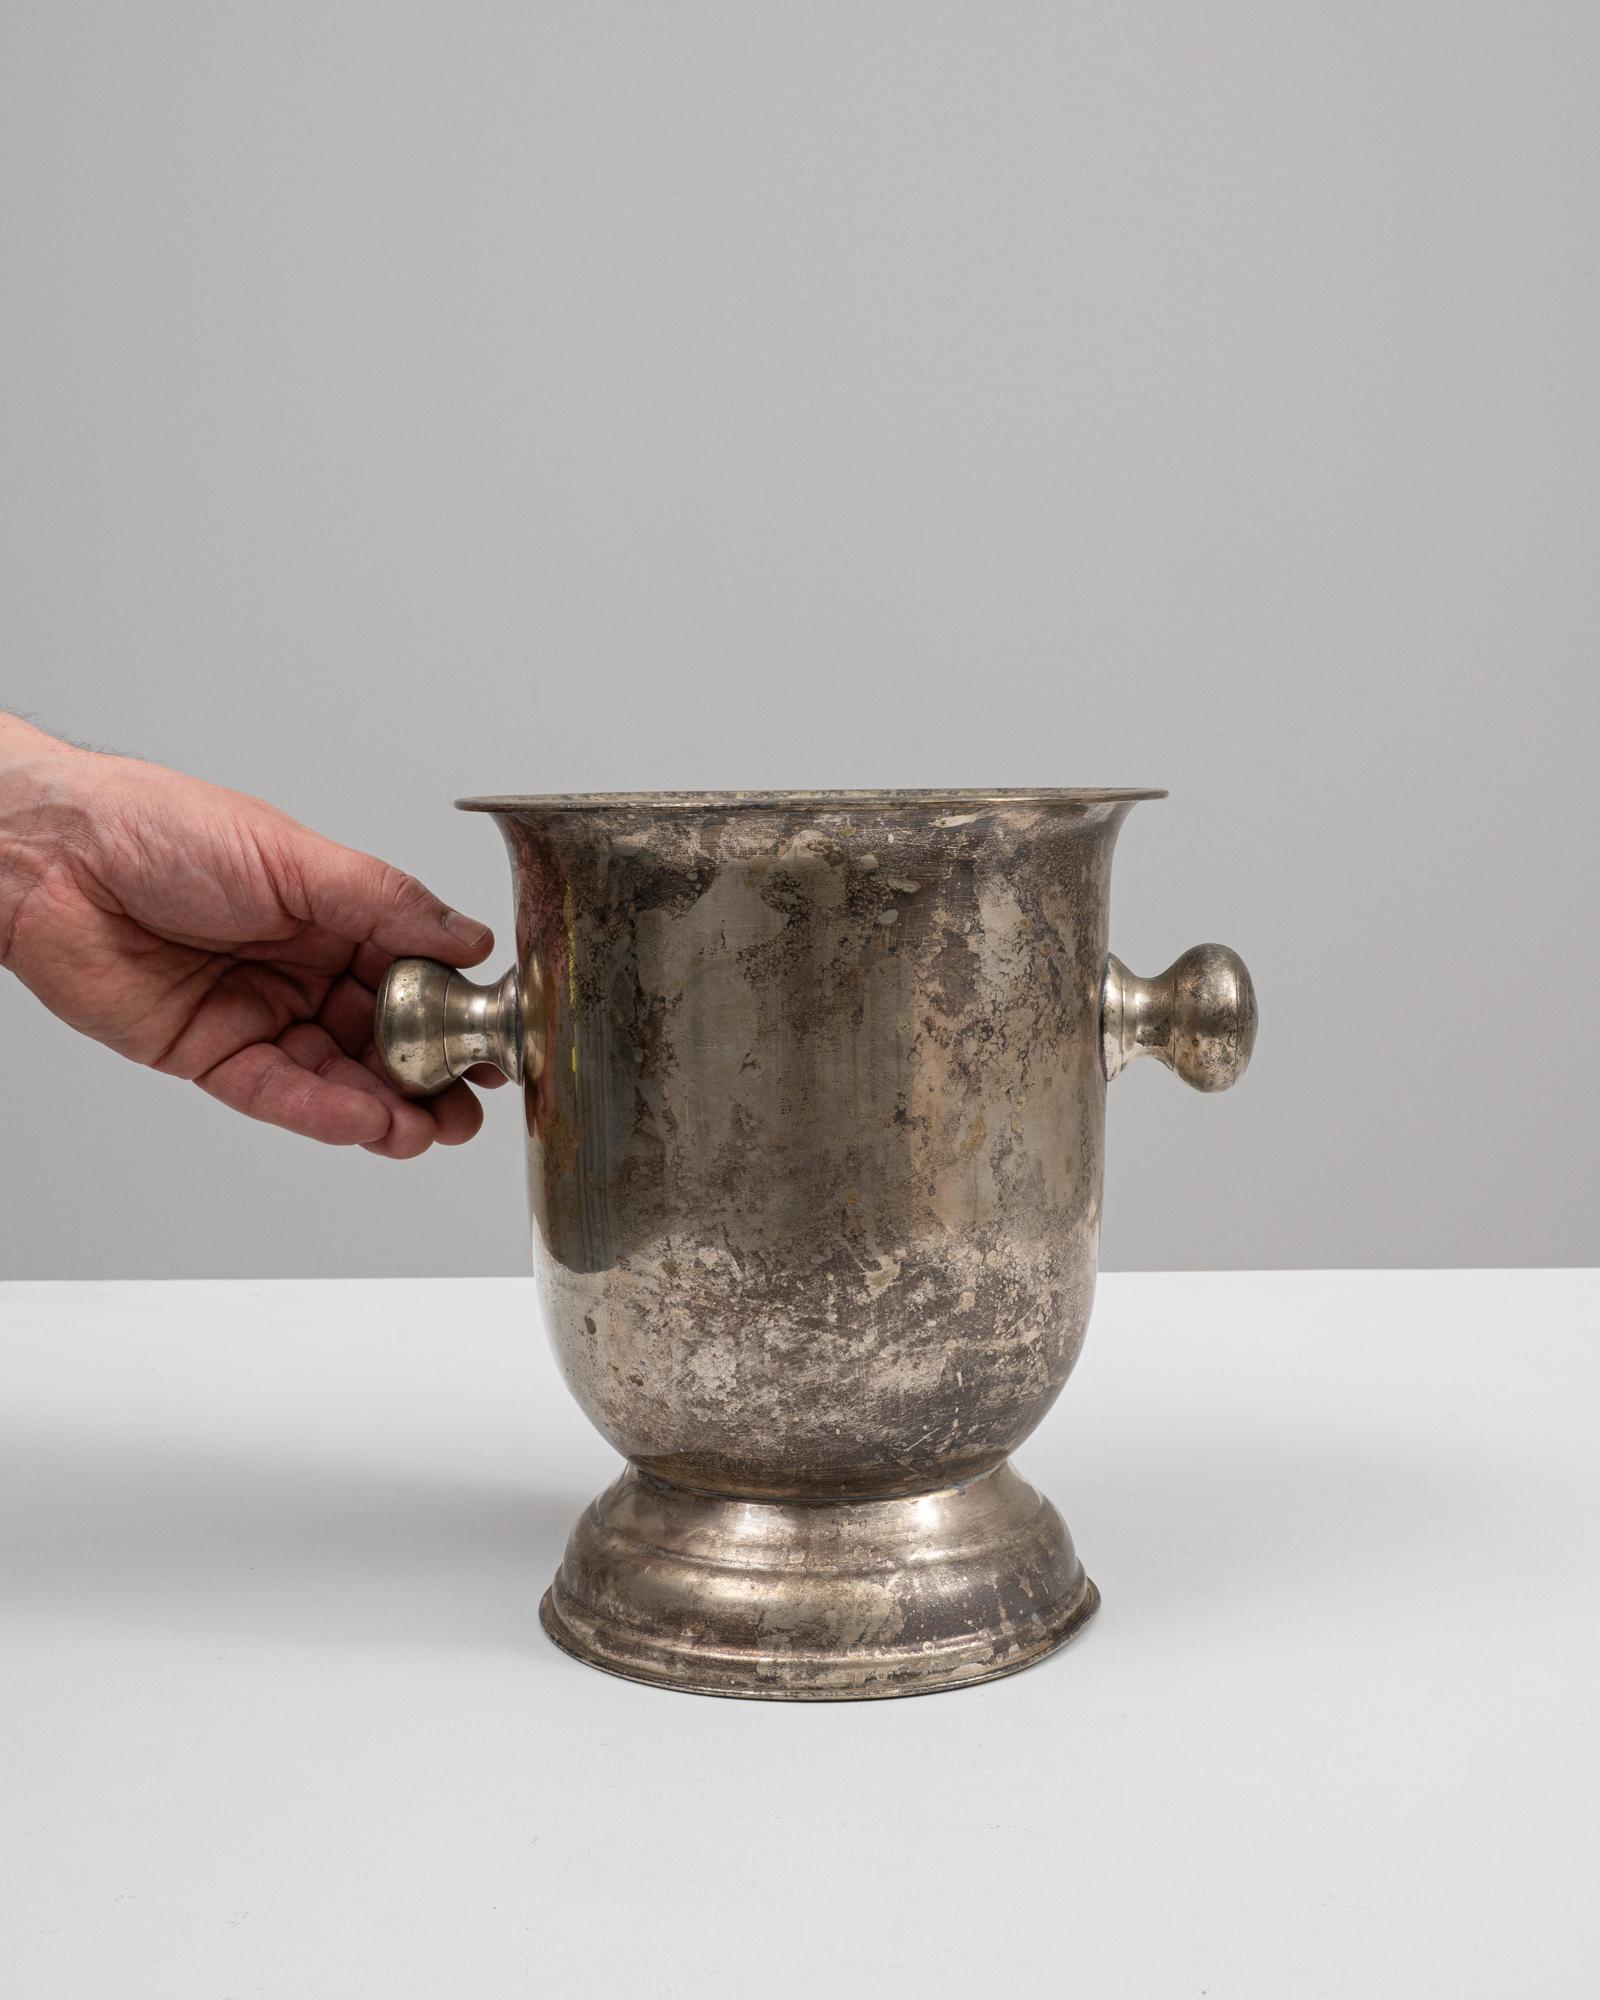 Introducing the exquisite 19th Century French Metal Ice Bucket—a true embodiment of vintage charm and elegance. This ornate piece captures the essence of classic French craftsmanship with its solid, aged metal construction and ornamental handles